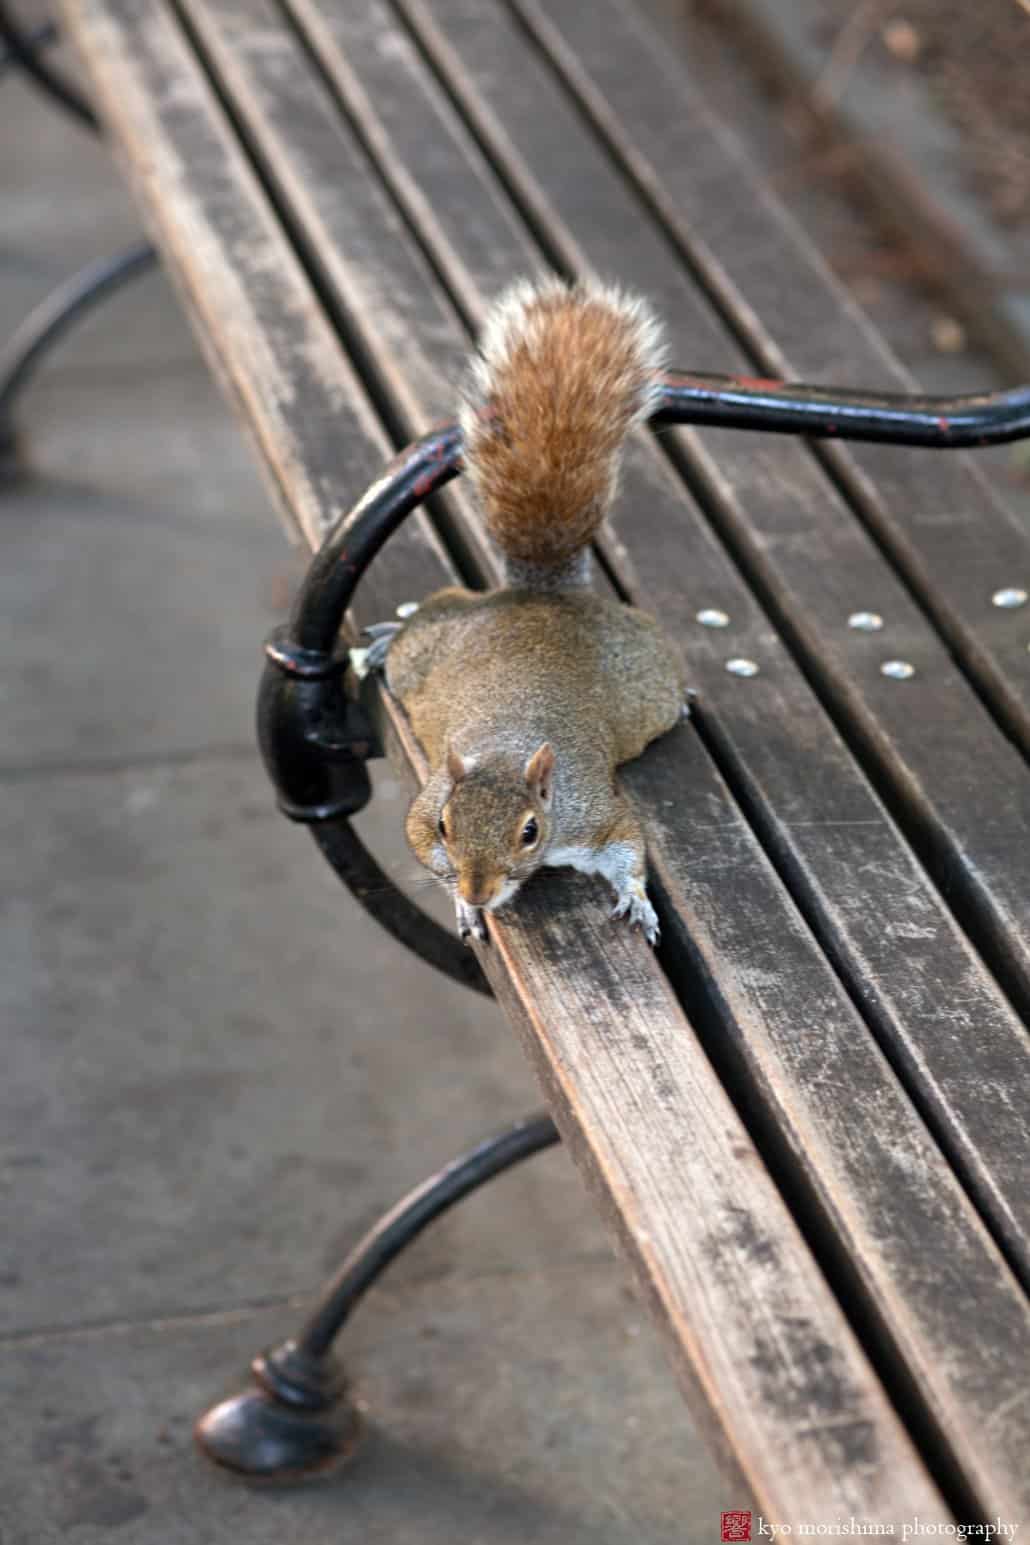 Closeup of a squirrel on a NYC street bench, photographed by Kyo Morishima